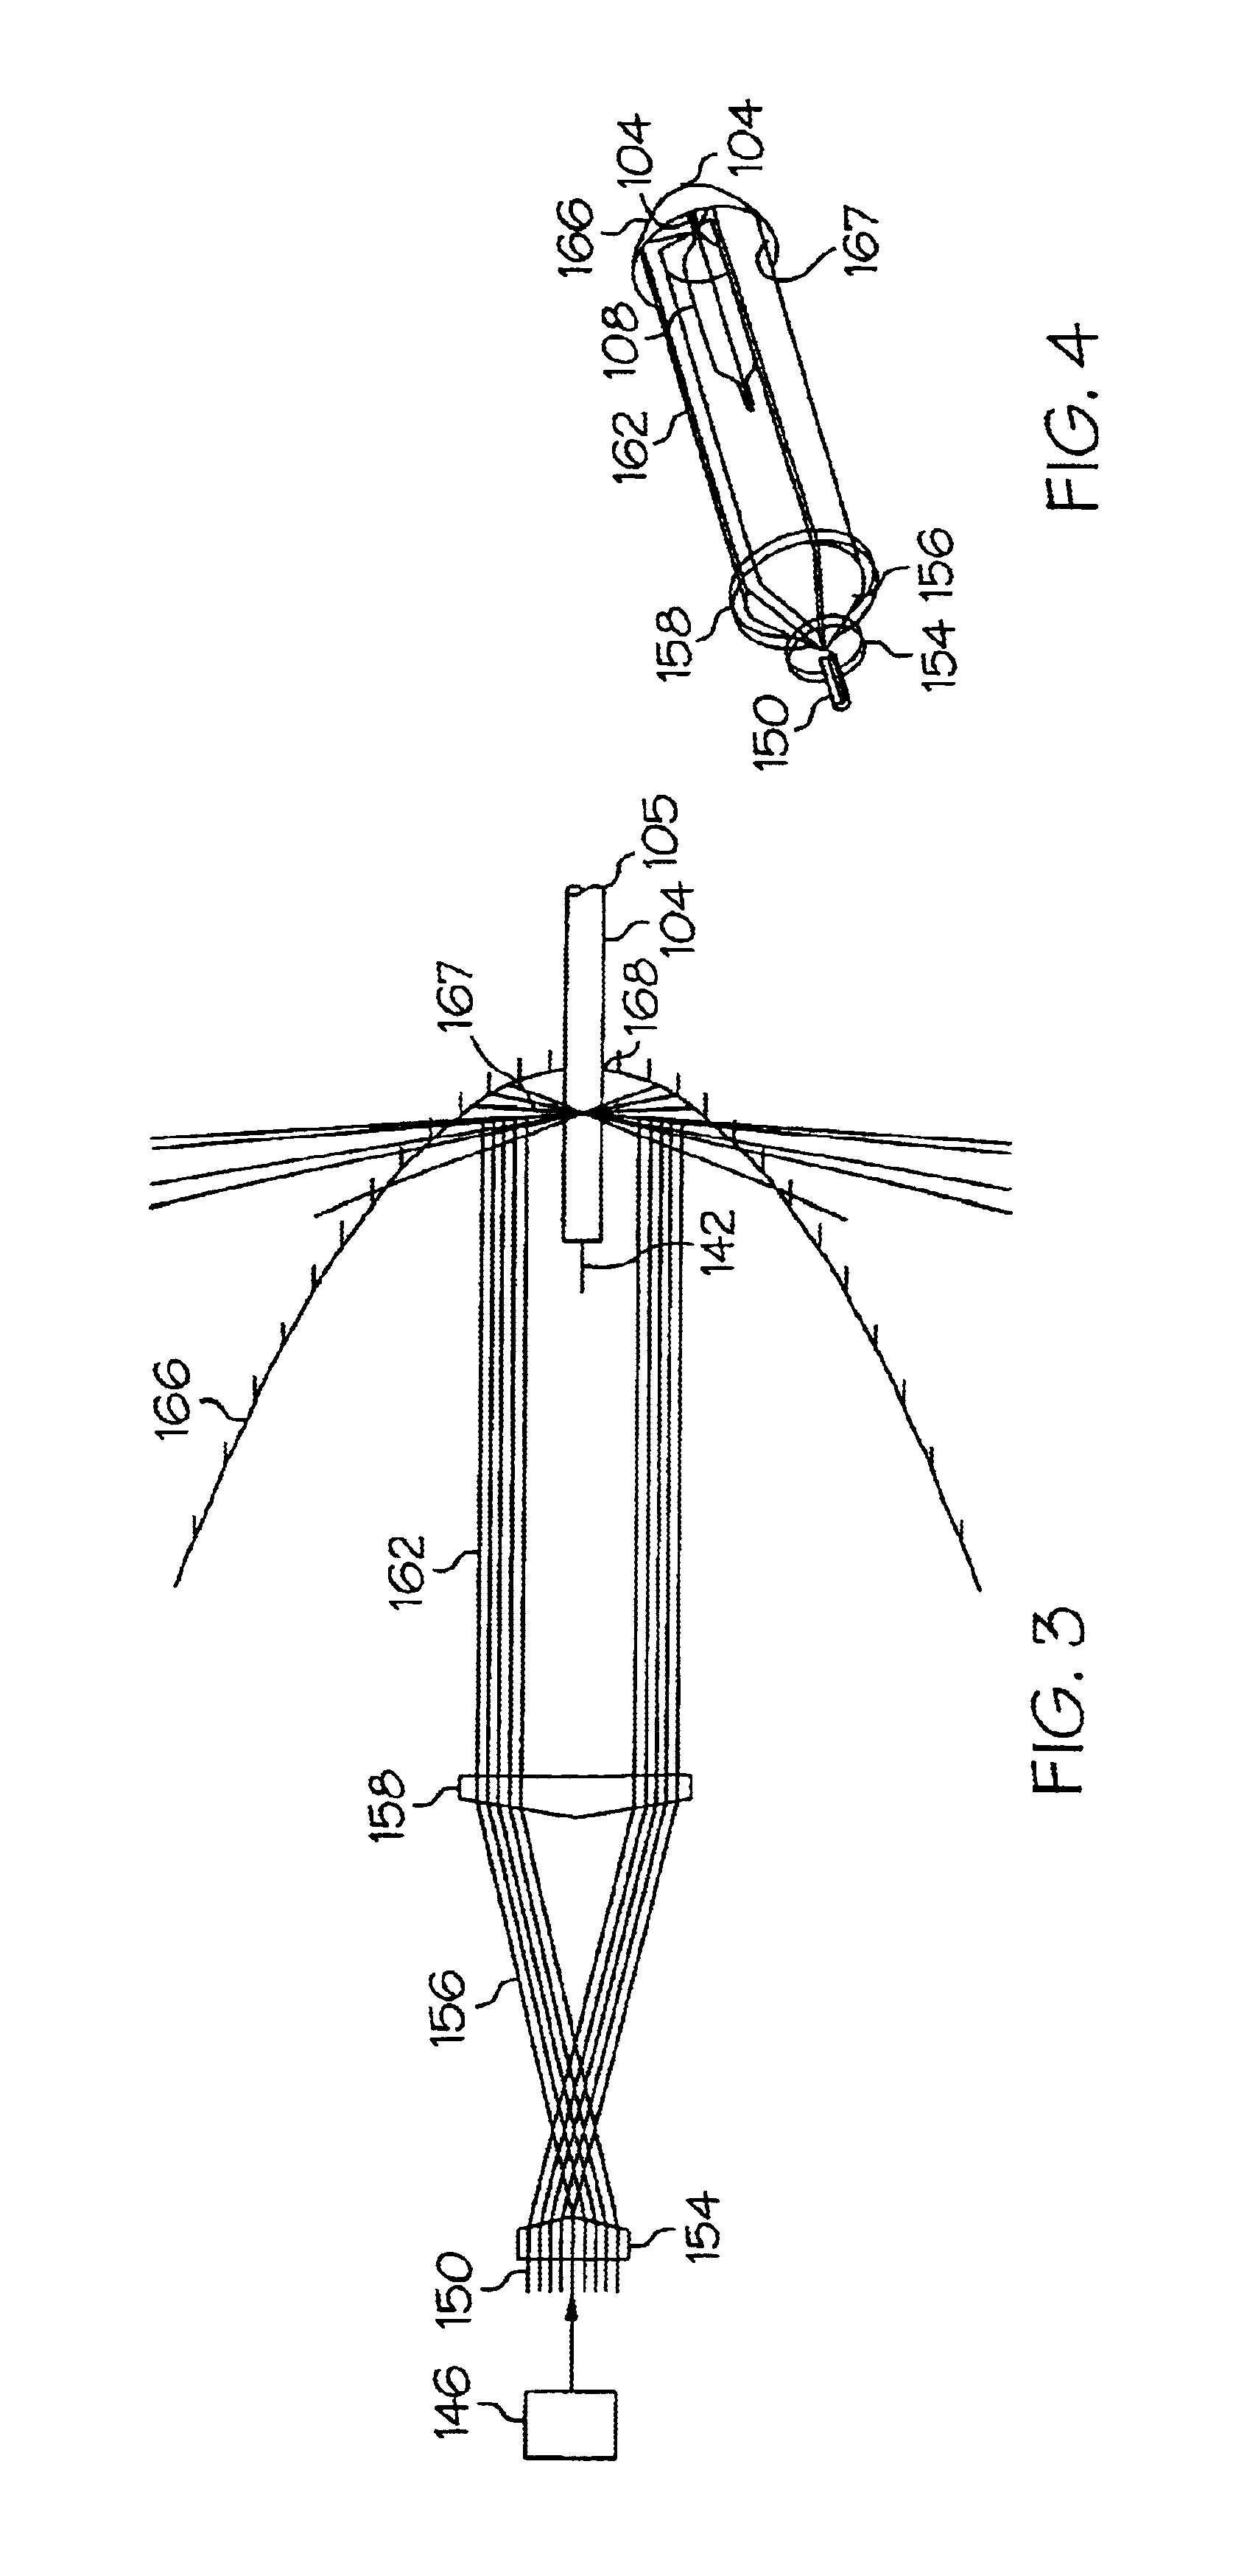 Method of applying a laser beam around the circumference of a catheter